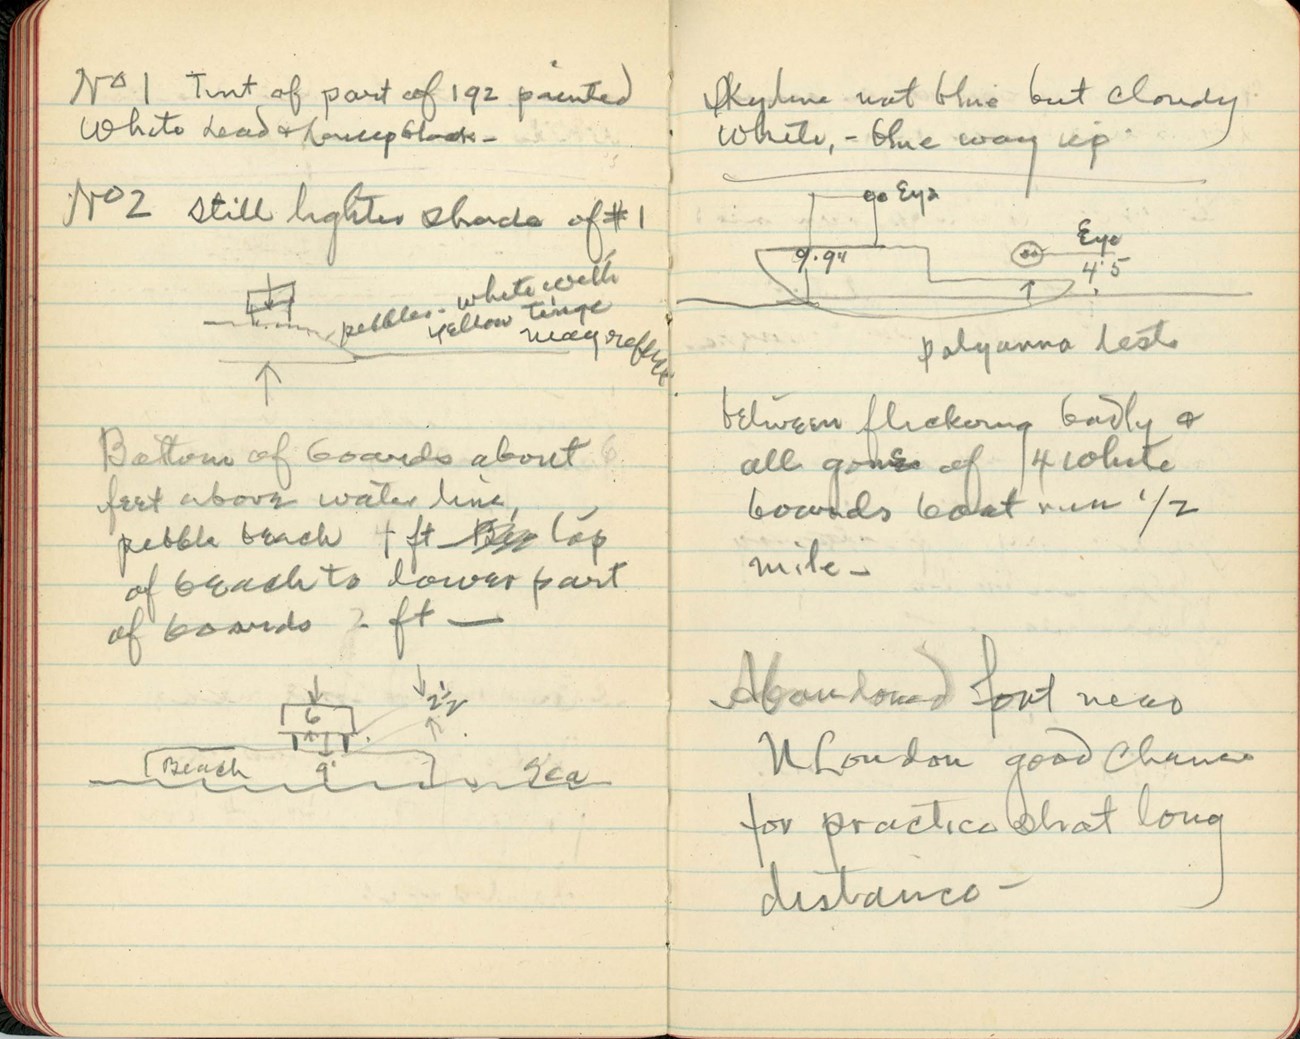 Edison kept detailed notes of his experiments while aboard the Sachem in 1917. These notes record his smoke screen and camouflage tests.